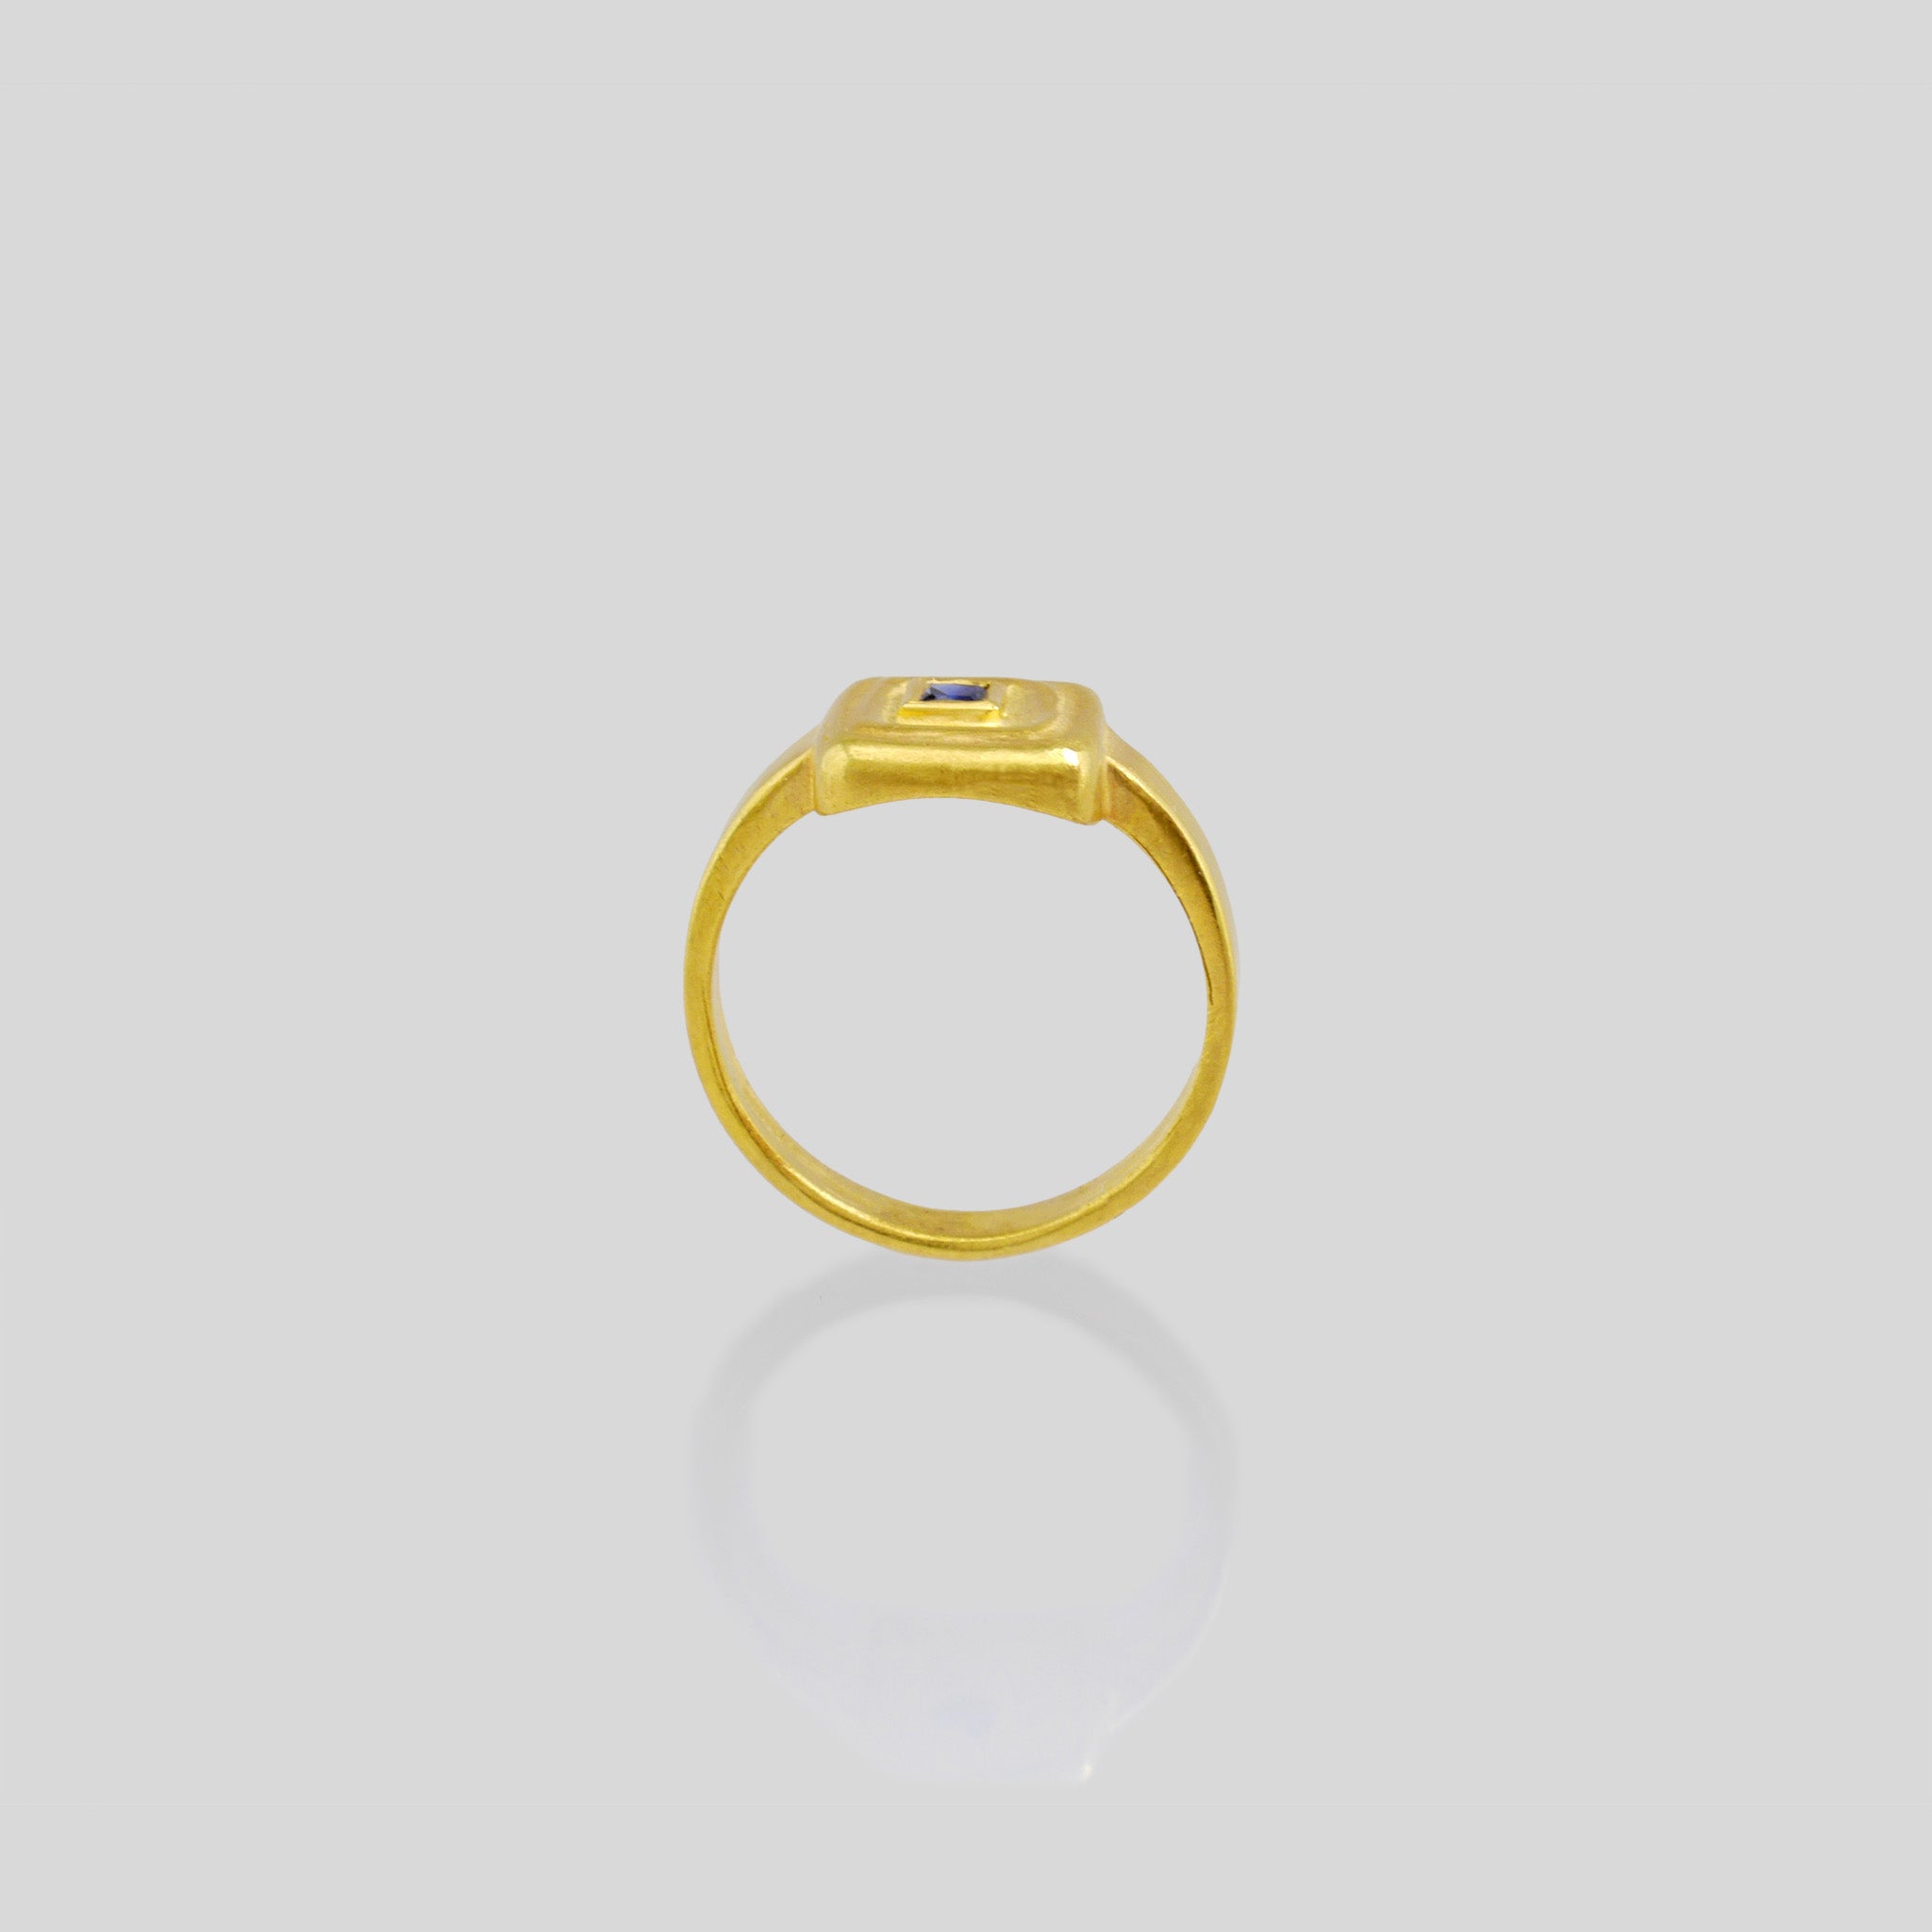 Side view of Handcrafted 18k Gold ring featuring a square Ruby set atop a square surface, evoking the ancient Egyptian era's golden jewelry of the Pharaohs.